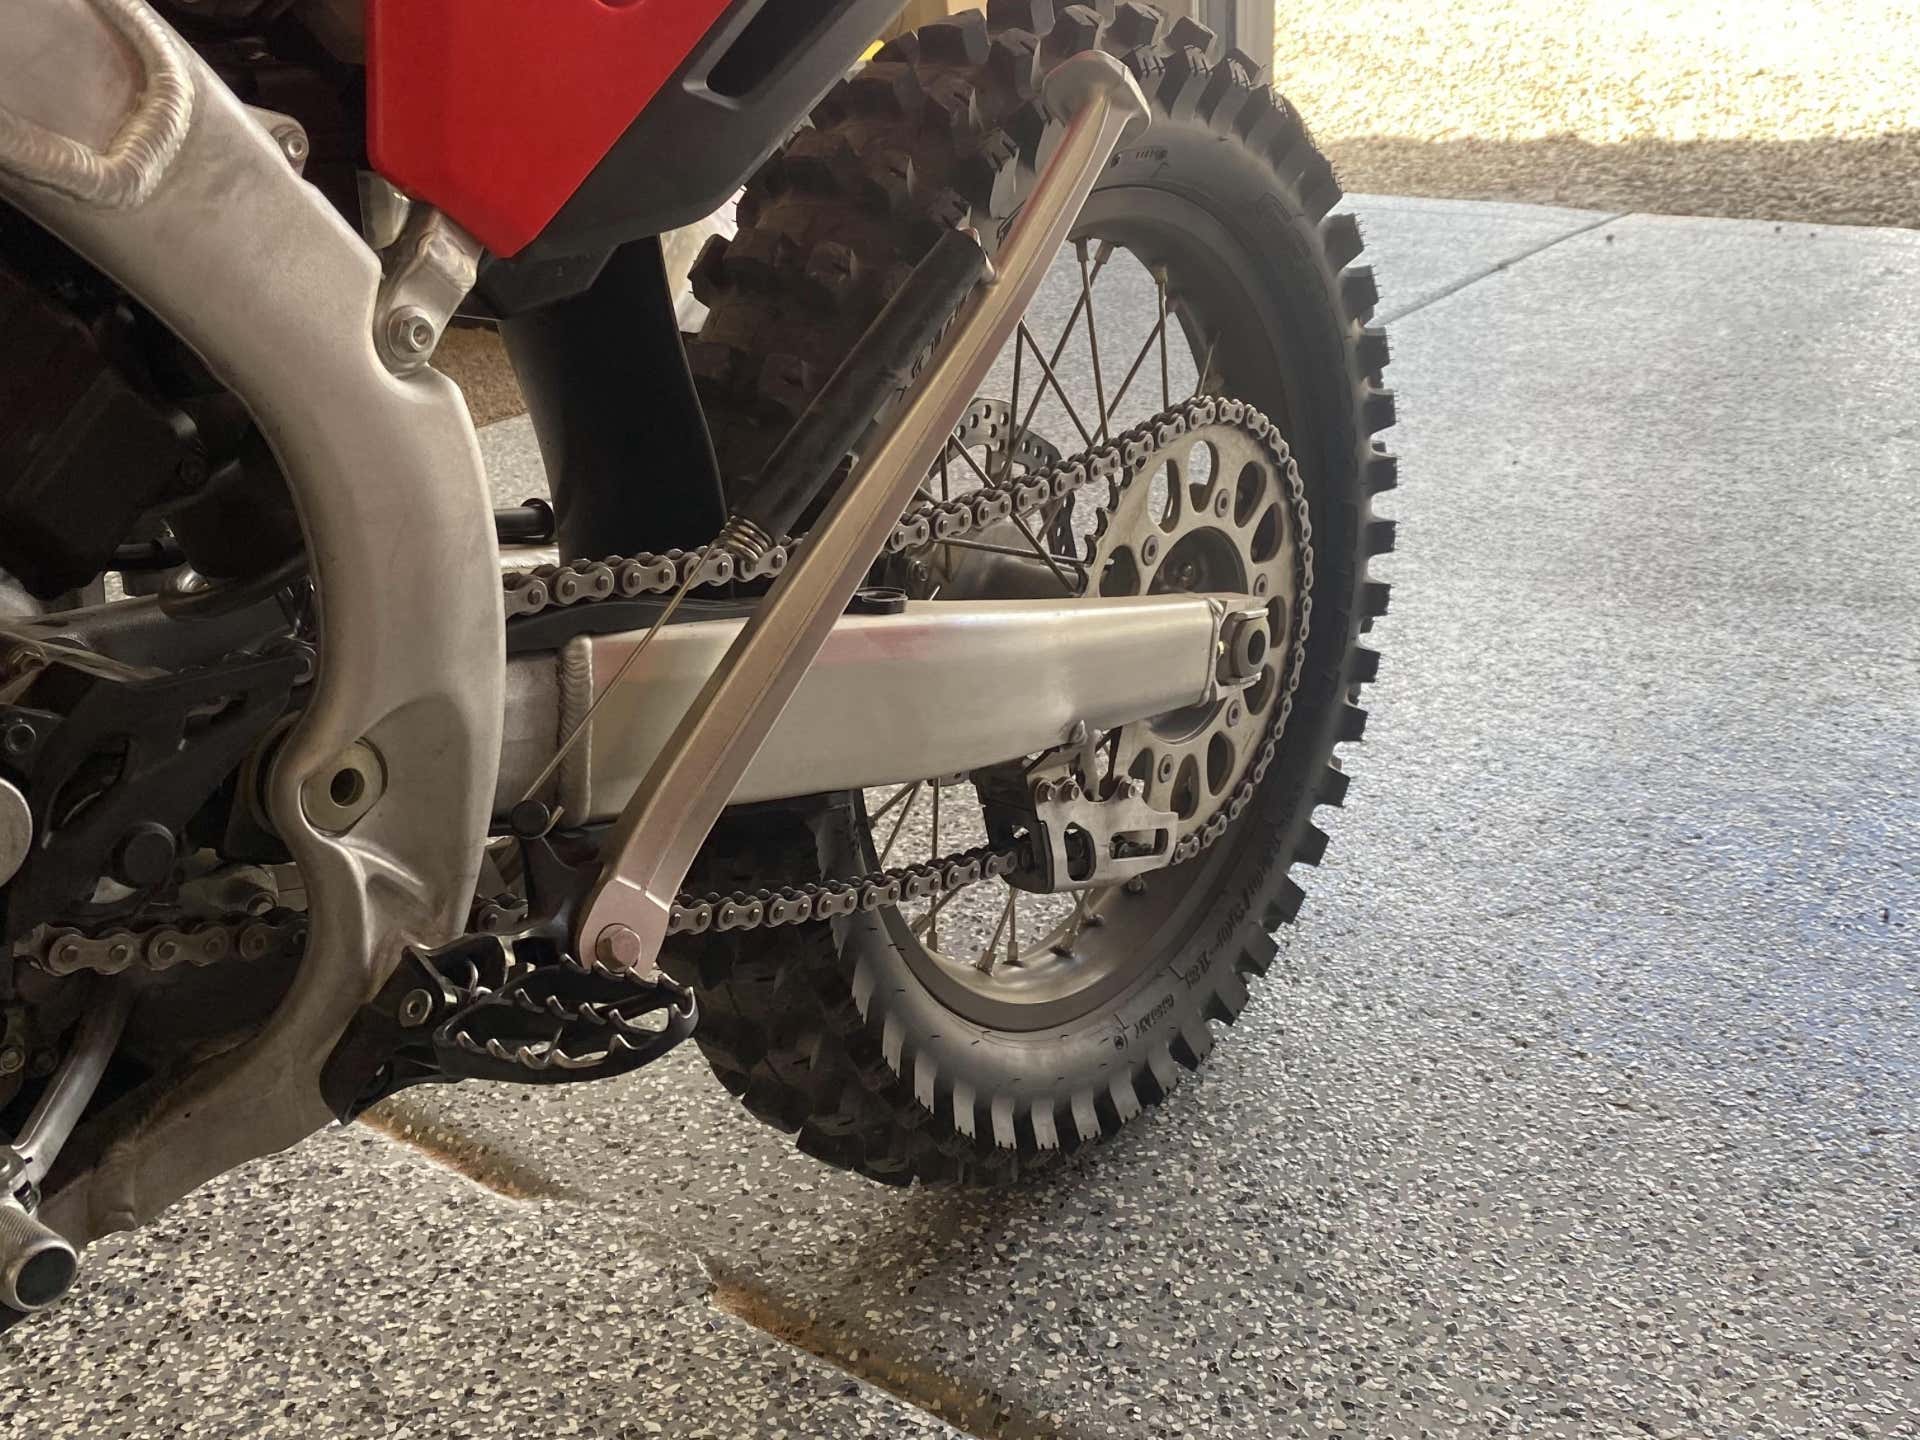 The full view of a CRF450RX's drivetrain and sprockets.